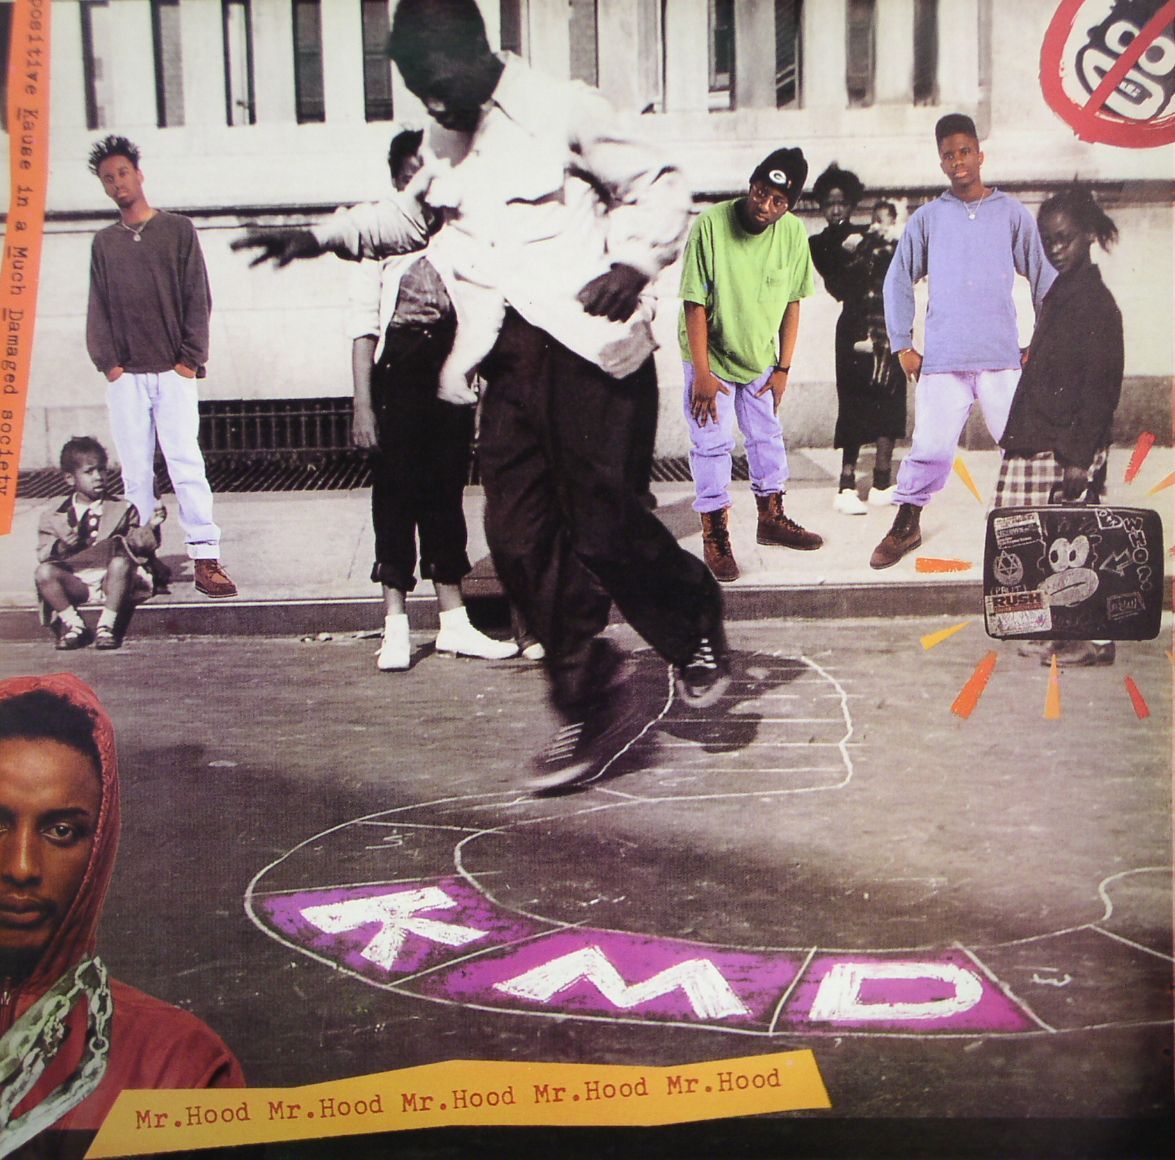 BACK IN THE DAY |5/7/91| KMD releases their debut album, Mr. Hood, on Elektra Records.